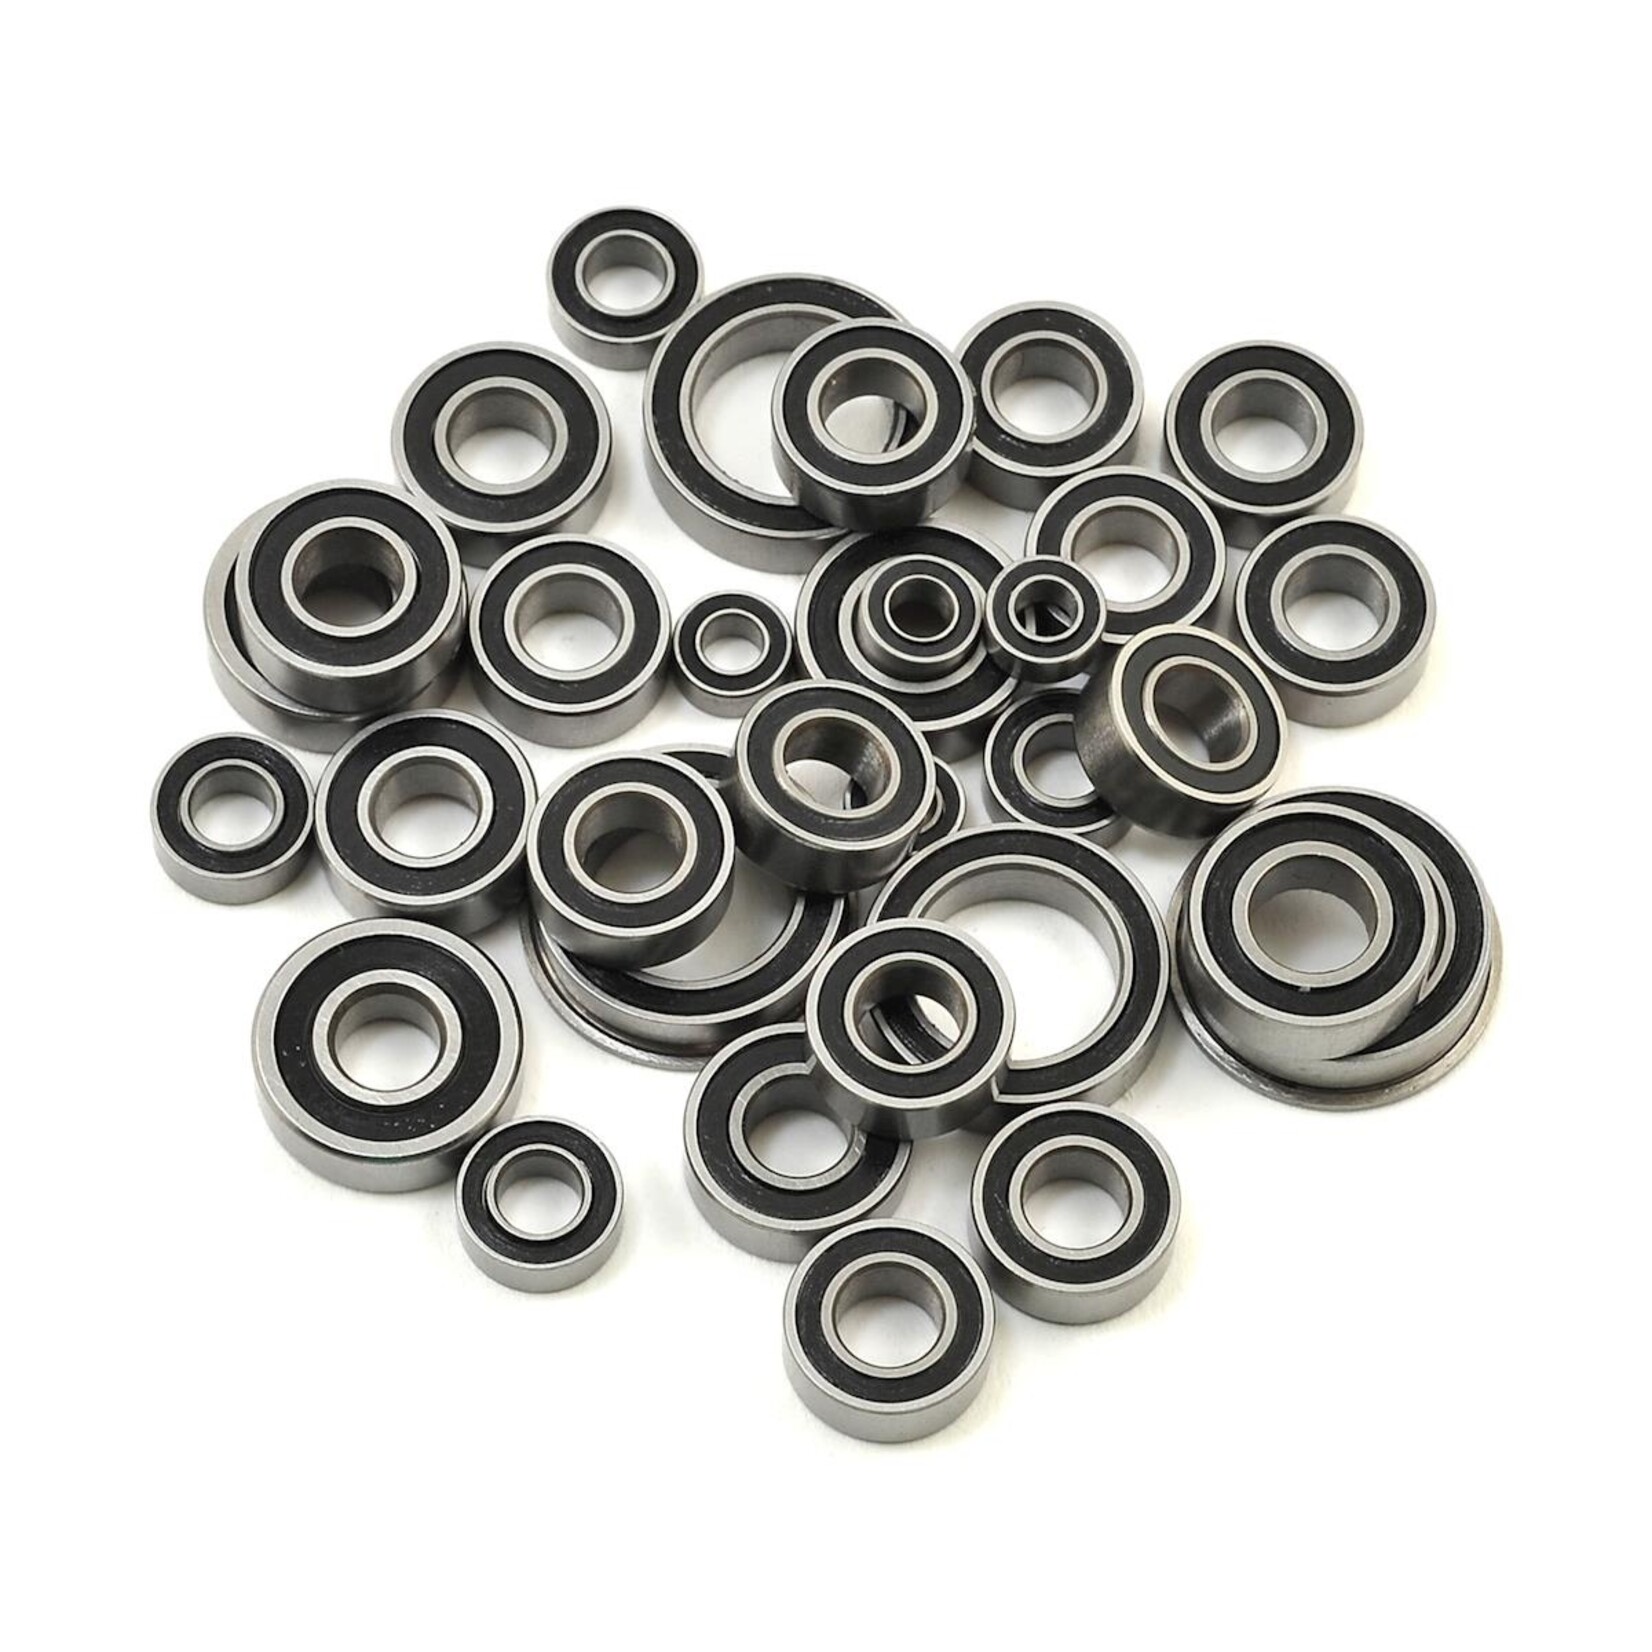 FastEddy FastEddy Losi TLR 22X-4 Race Kit Sealed Bearing Kit #TFE5947